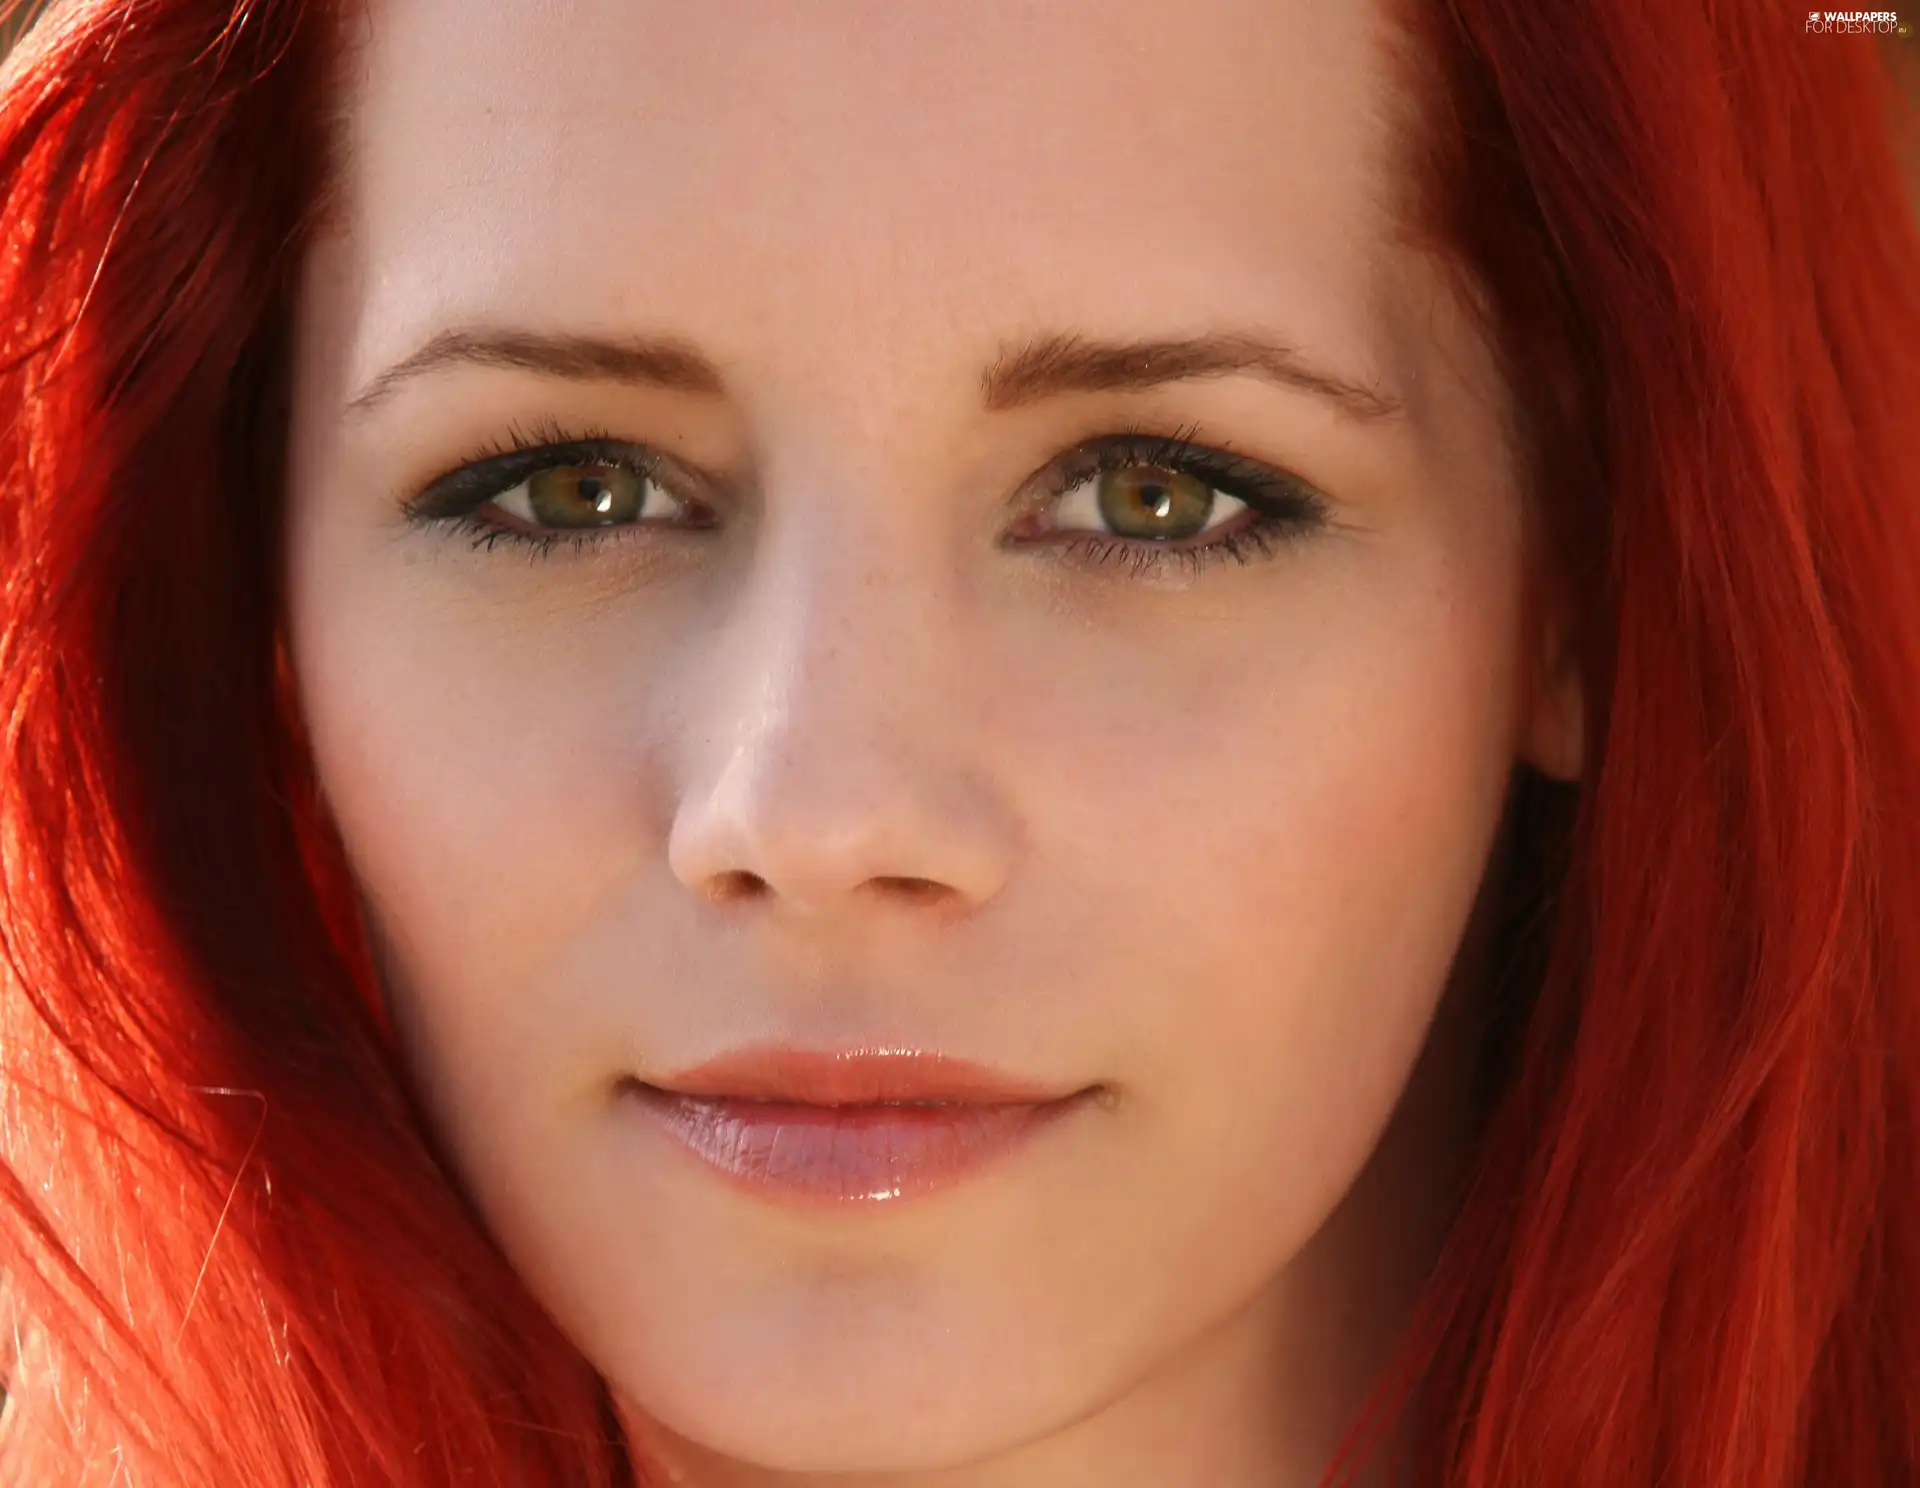 red head, Hair, Eyes, make-up, face